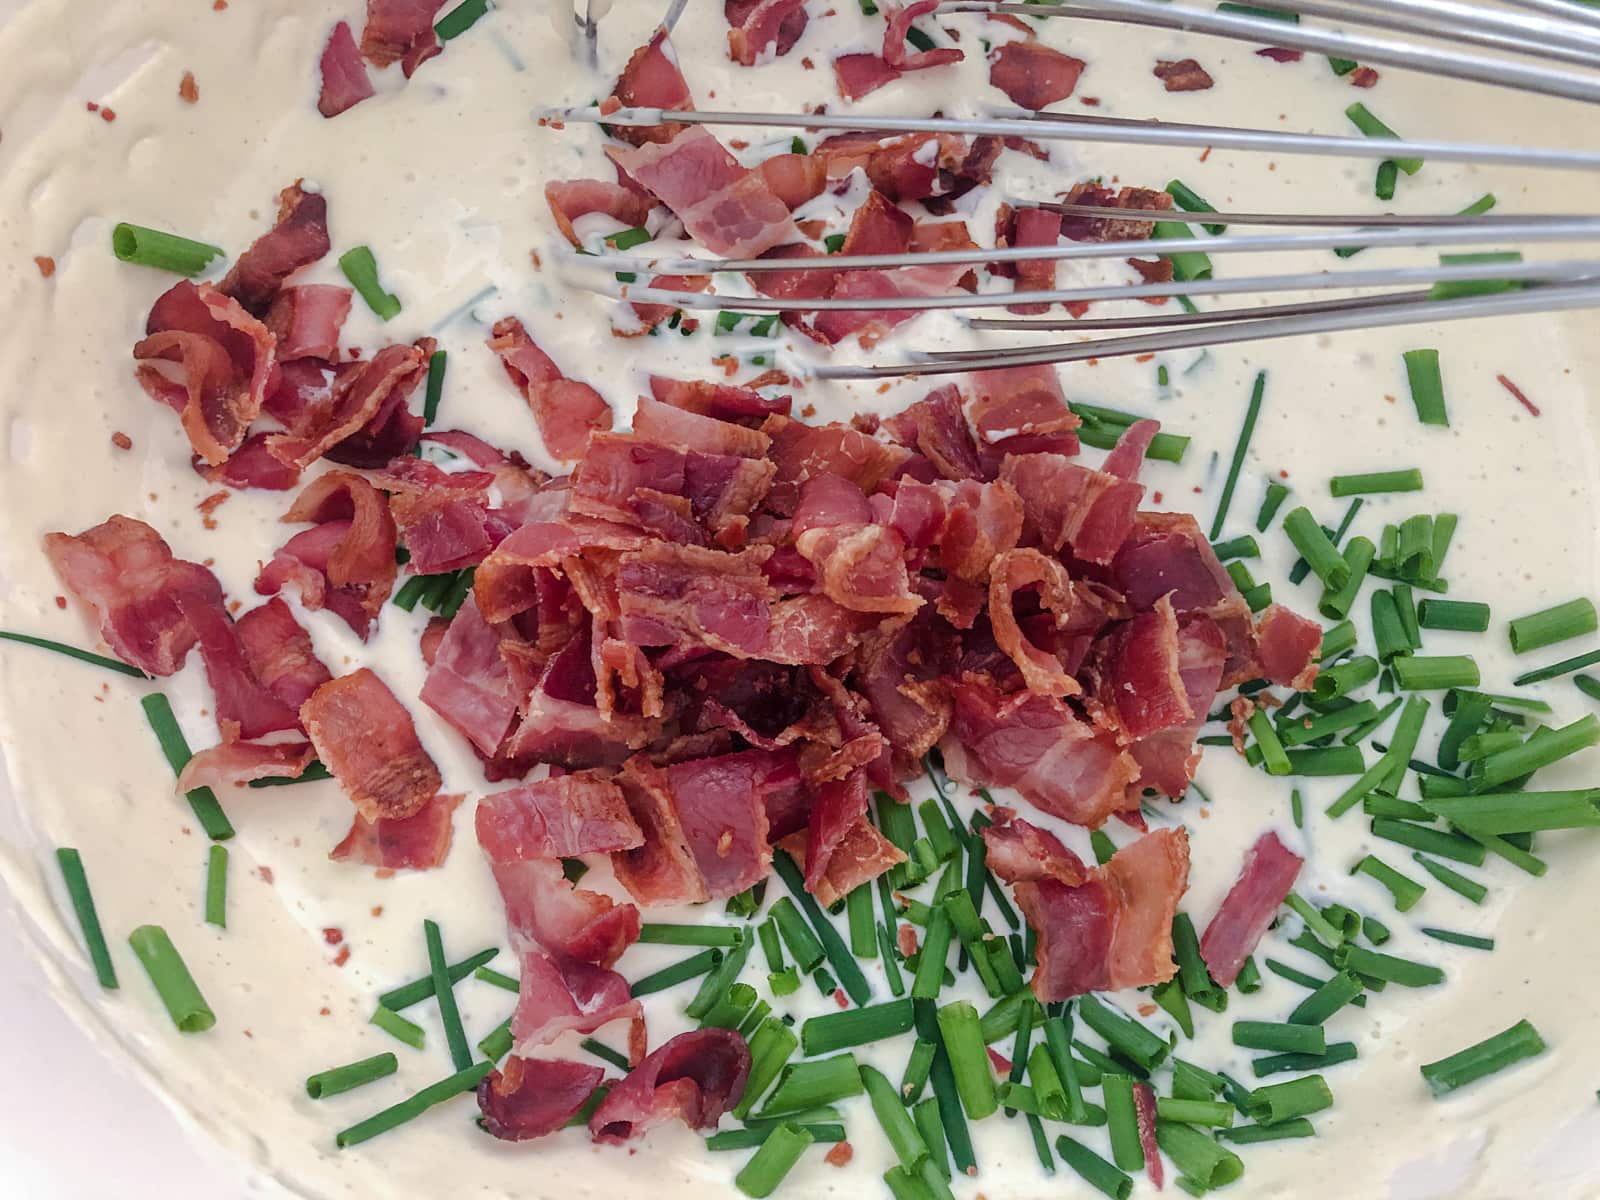 Bacon and chives added into a creamy dressing.